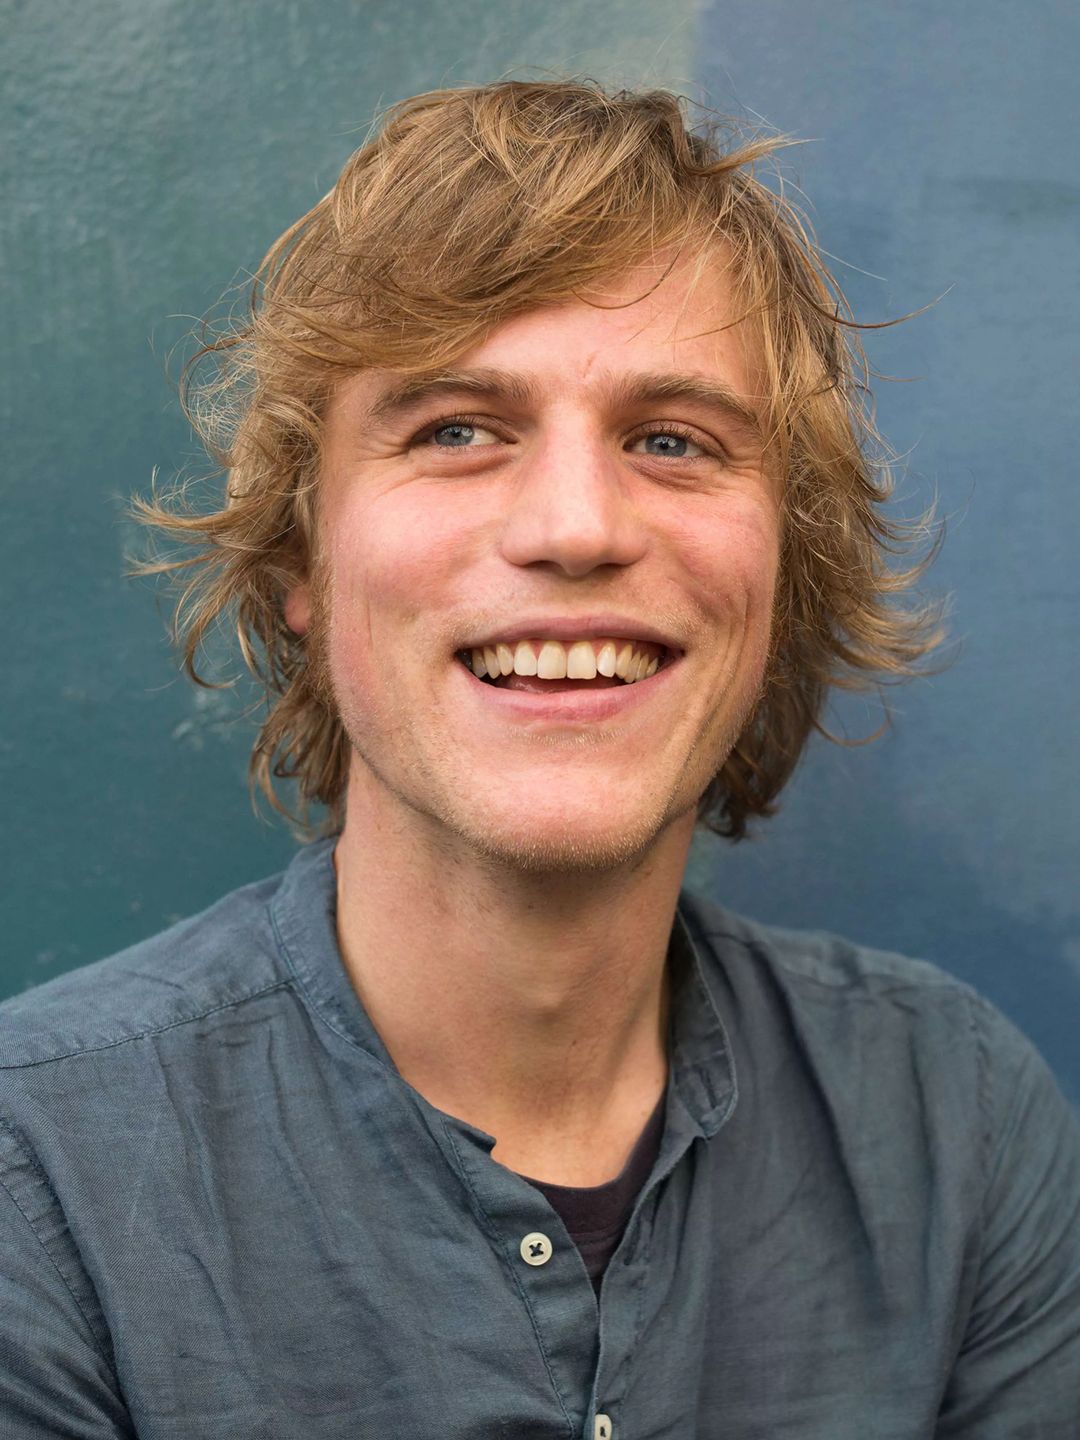 Johnny Flynn who is he